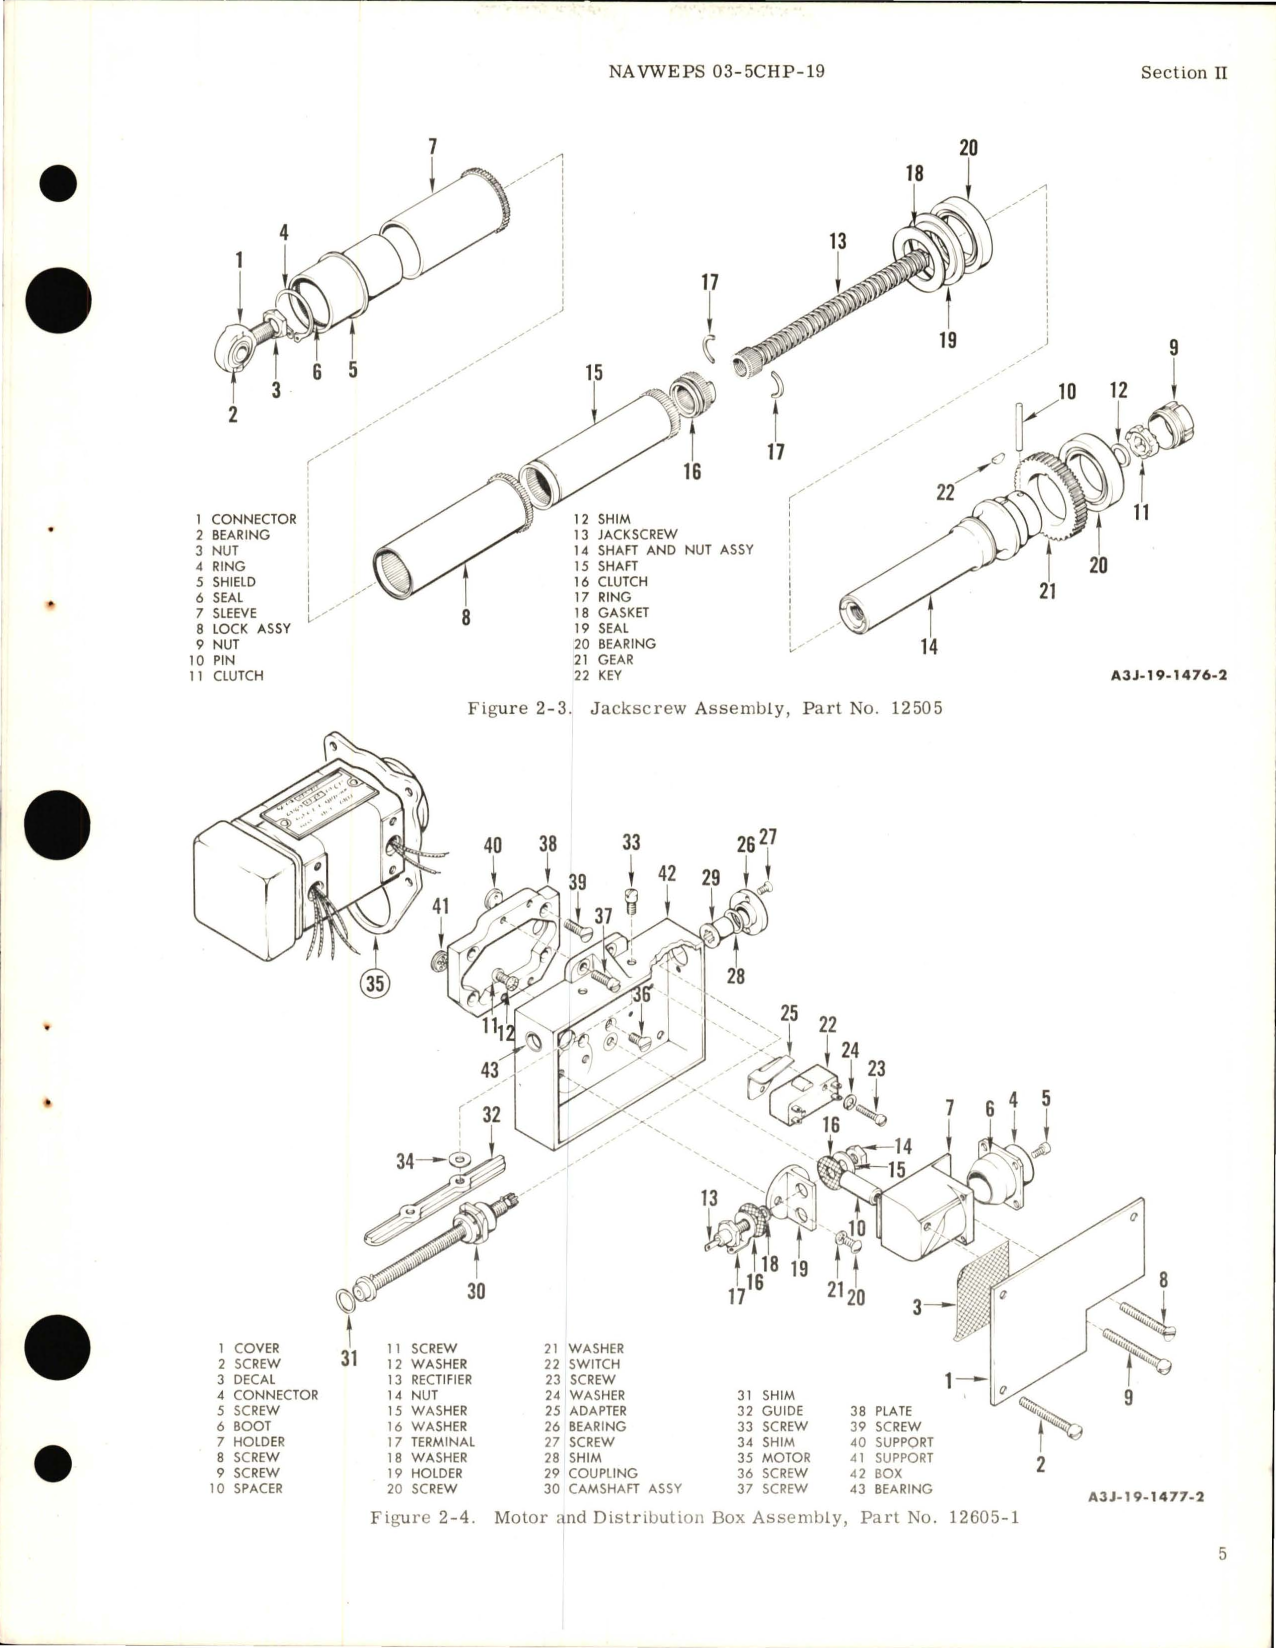 Sample page 9 from AirCorps Library document: Overhaul Instructions for Electro-Mechanical Linear Actuator 3070-2 and 36070-22